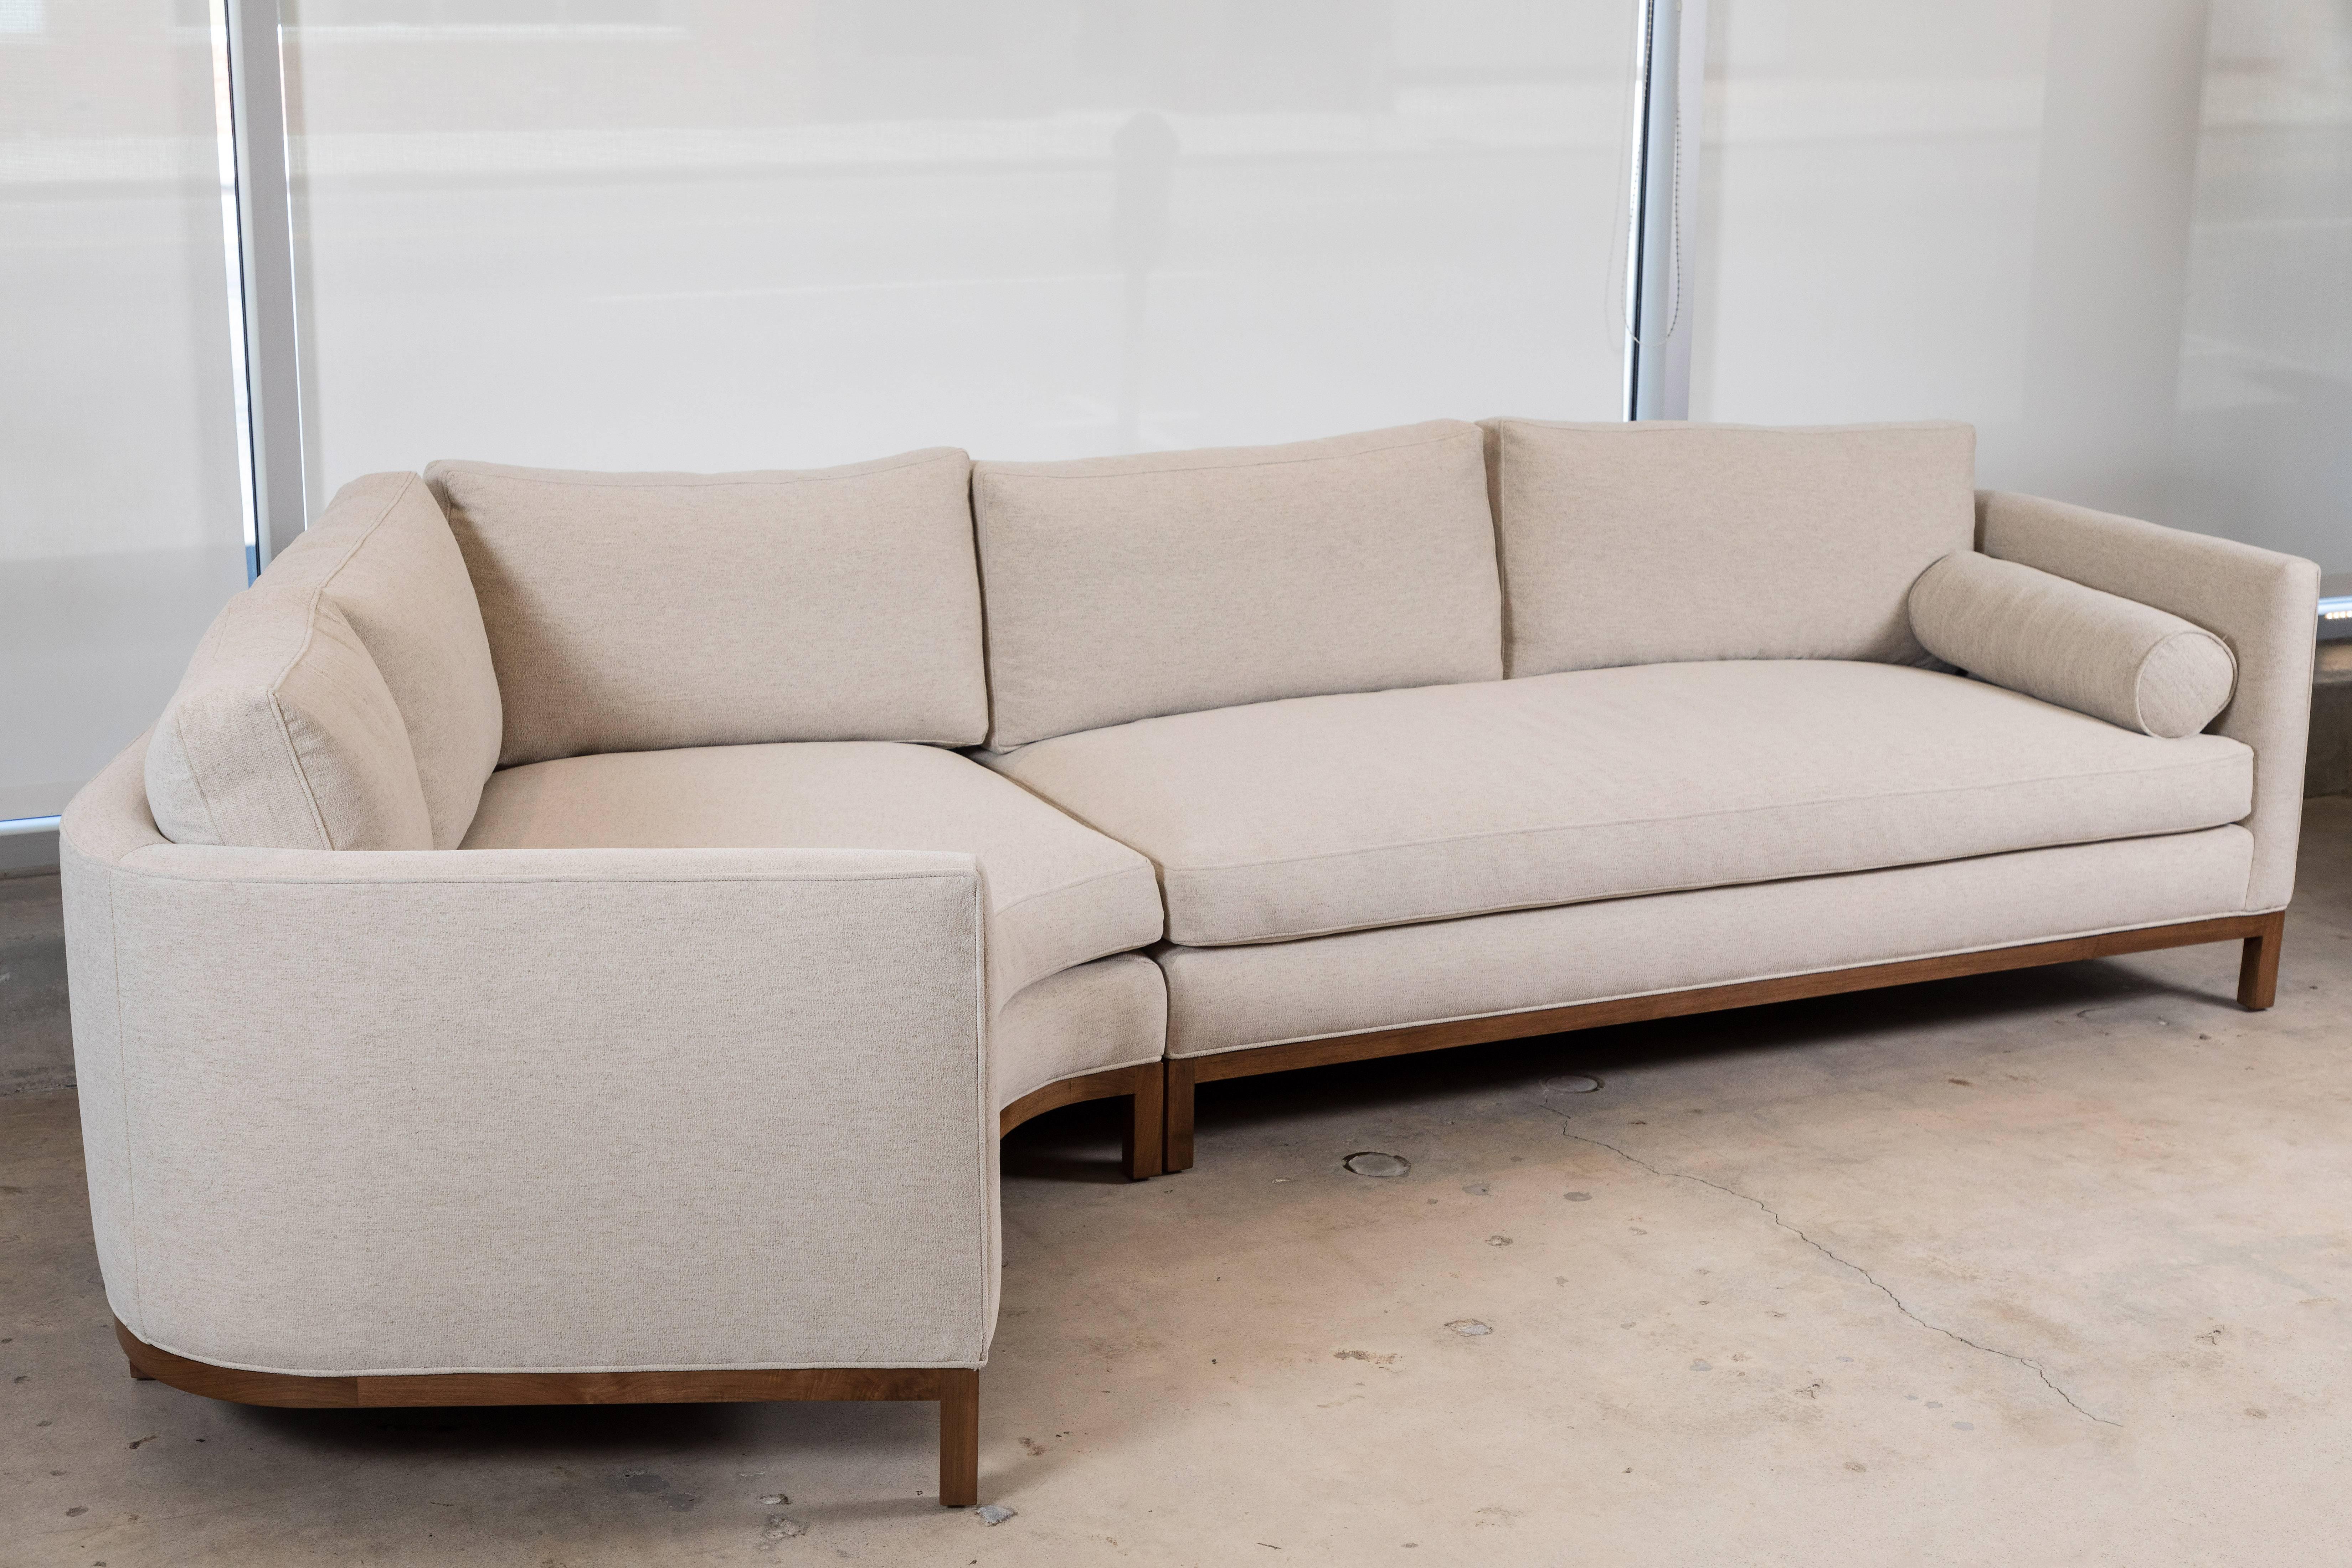 The Curved Back Sectional is a tuxedo style sofa with curved back corners and features down-wrapped, removable seat and back cushions and two bolsters. Can be made with a White Oak, American Walnut, or metal base.

Available to order in customer's